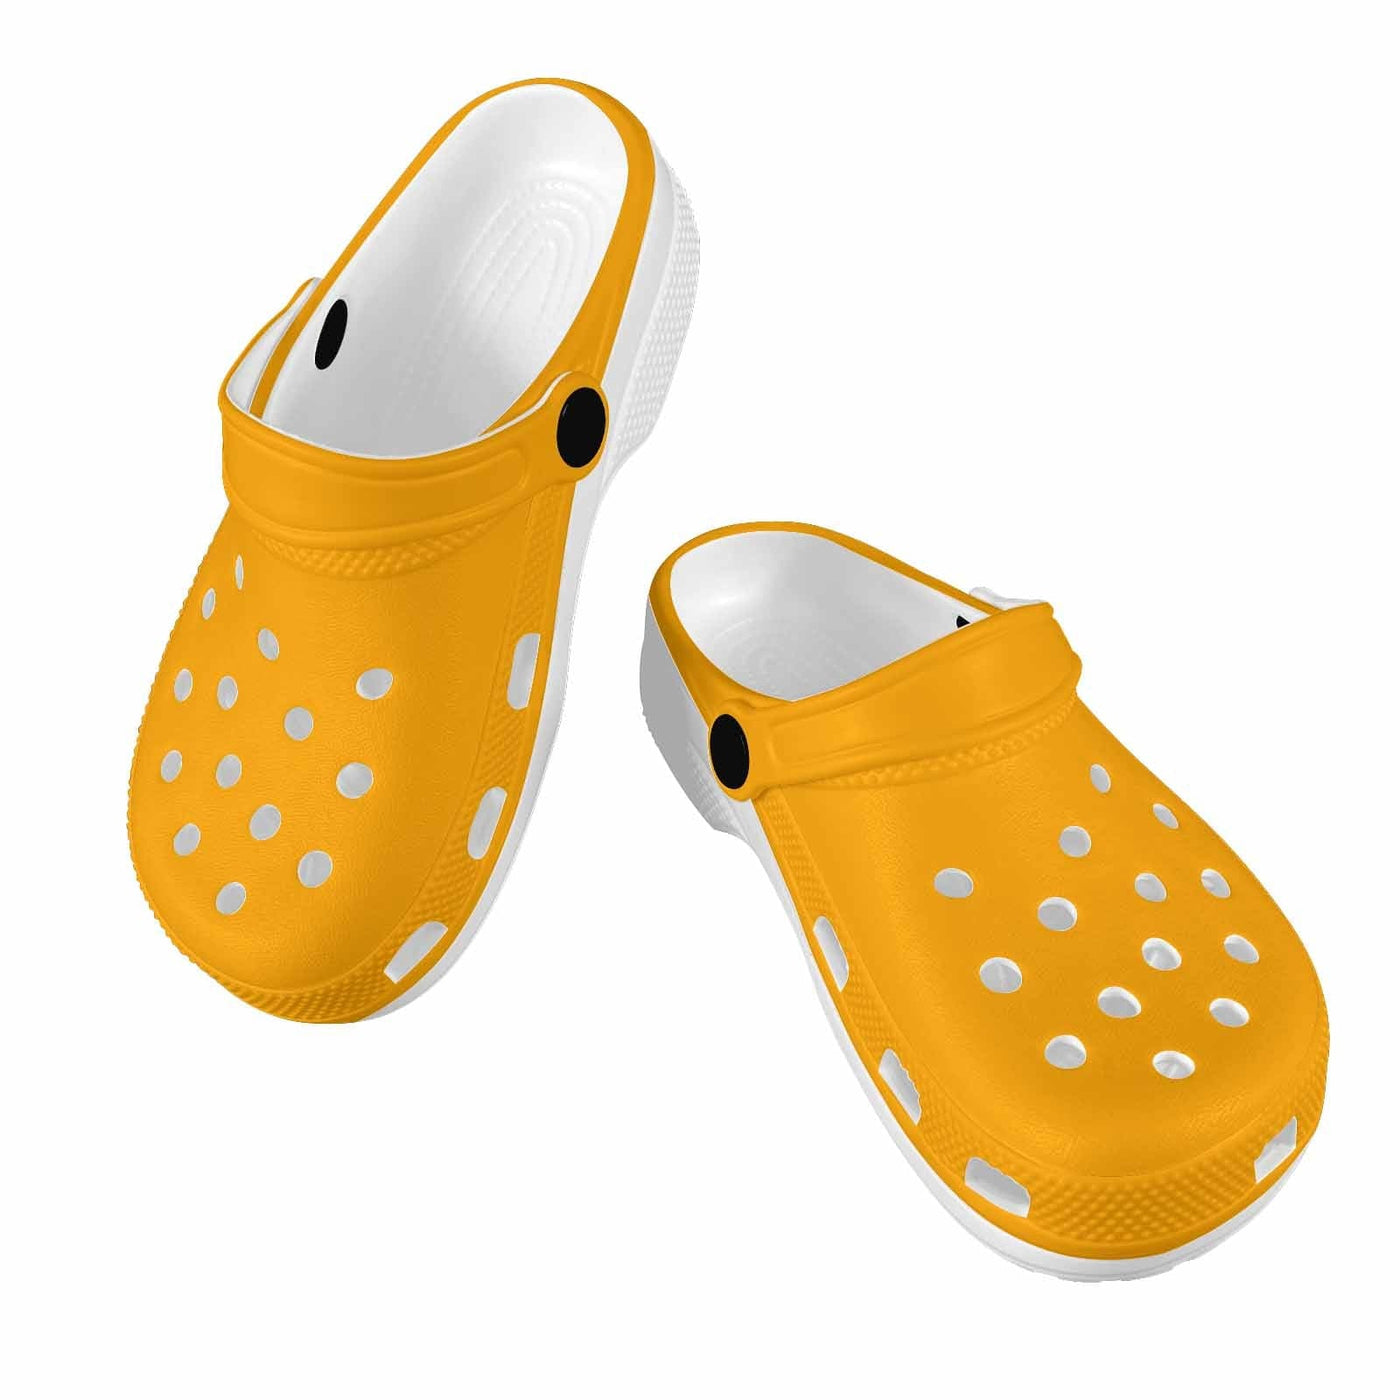 Orange Clogs For Youth - Unisex | Clogs | Youth